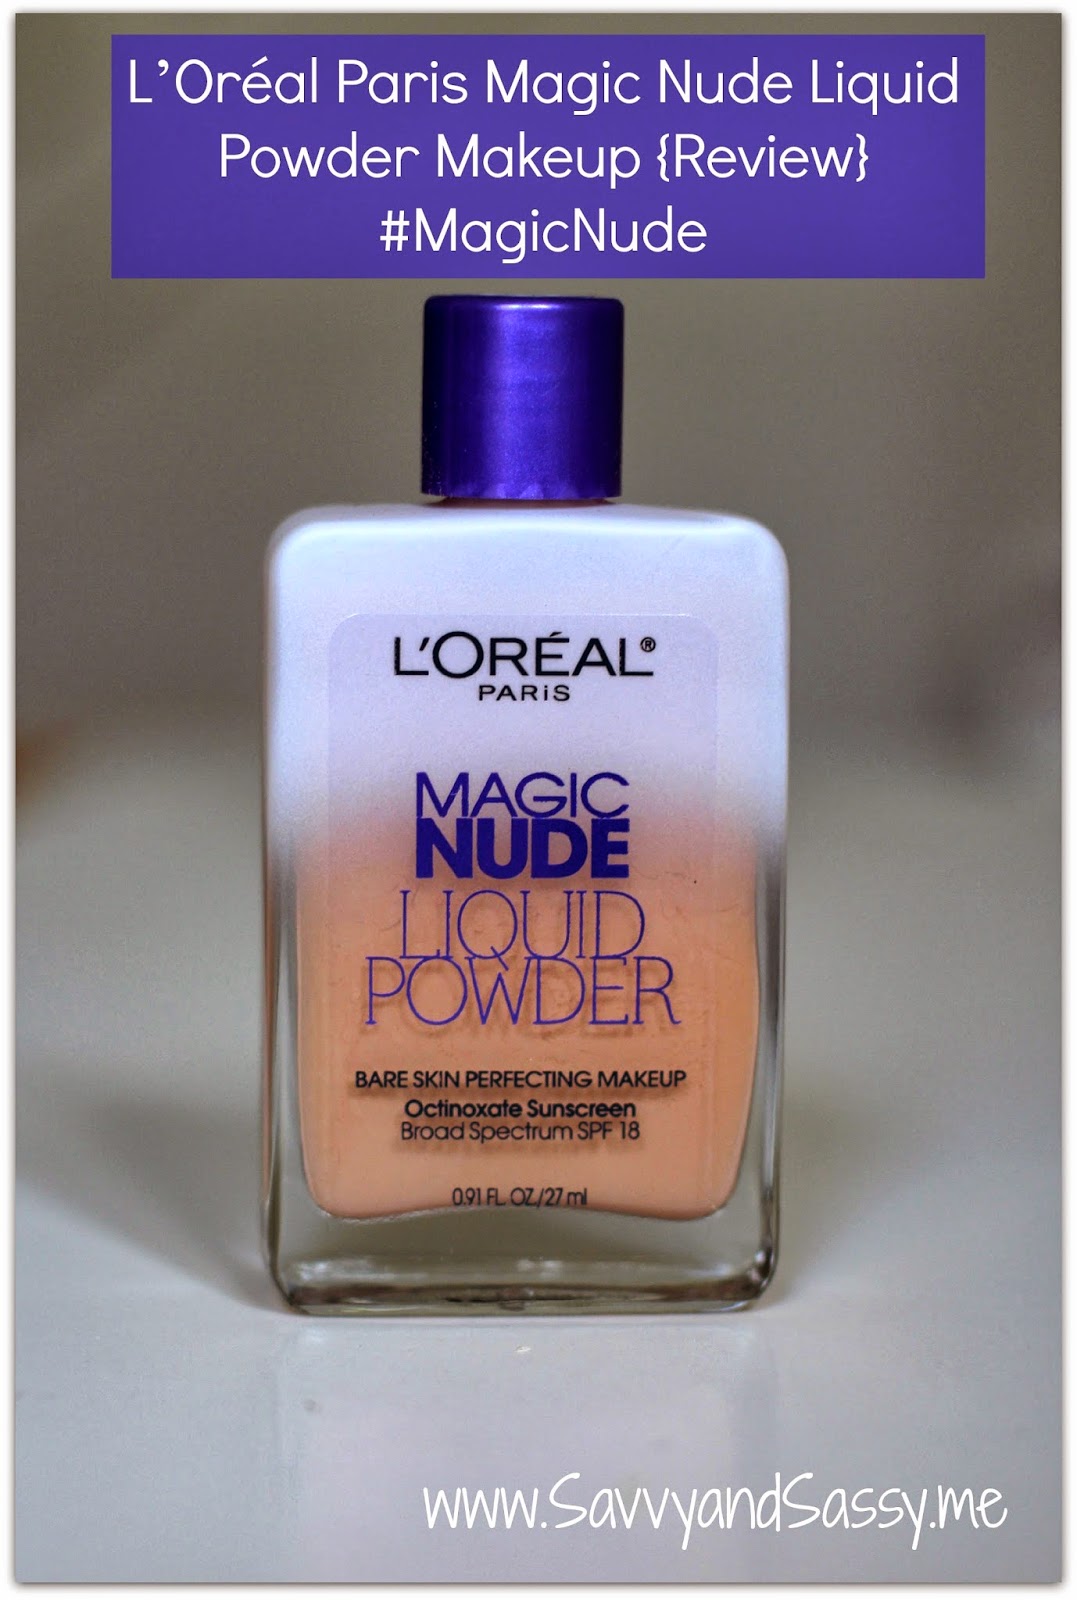 NaeSays: LOreal Magic Nude Liquid Powder: Review & Swatches